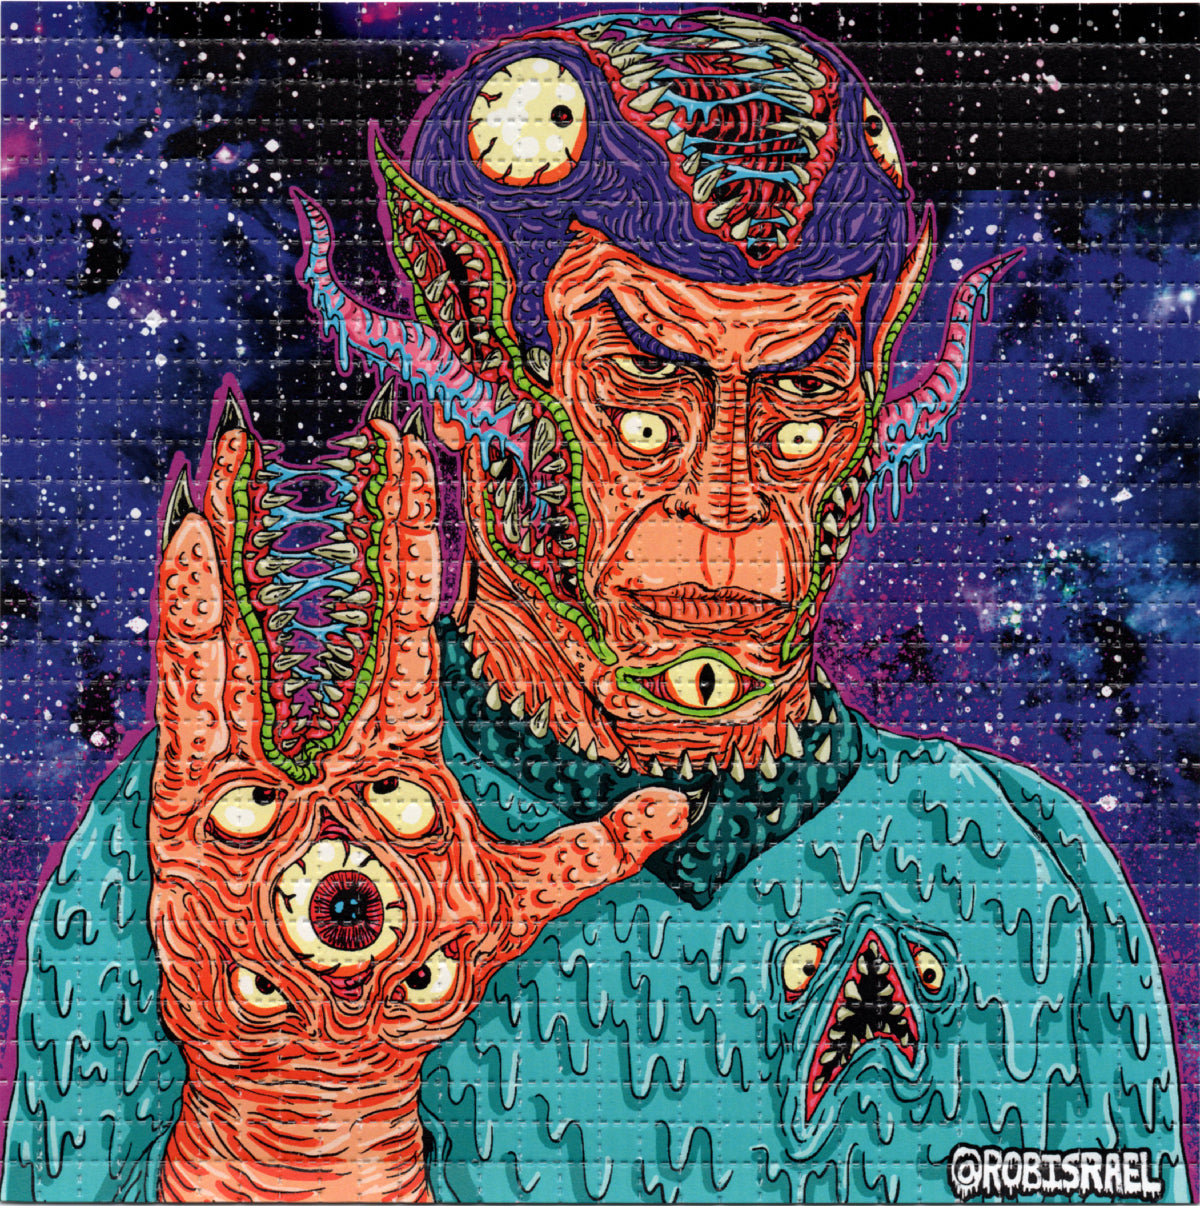 Spock by Rob Israel Limited Edition LSD blotter art print